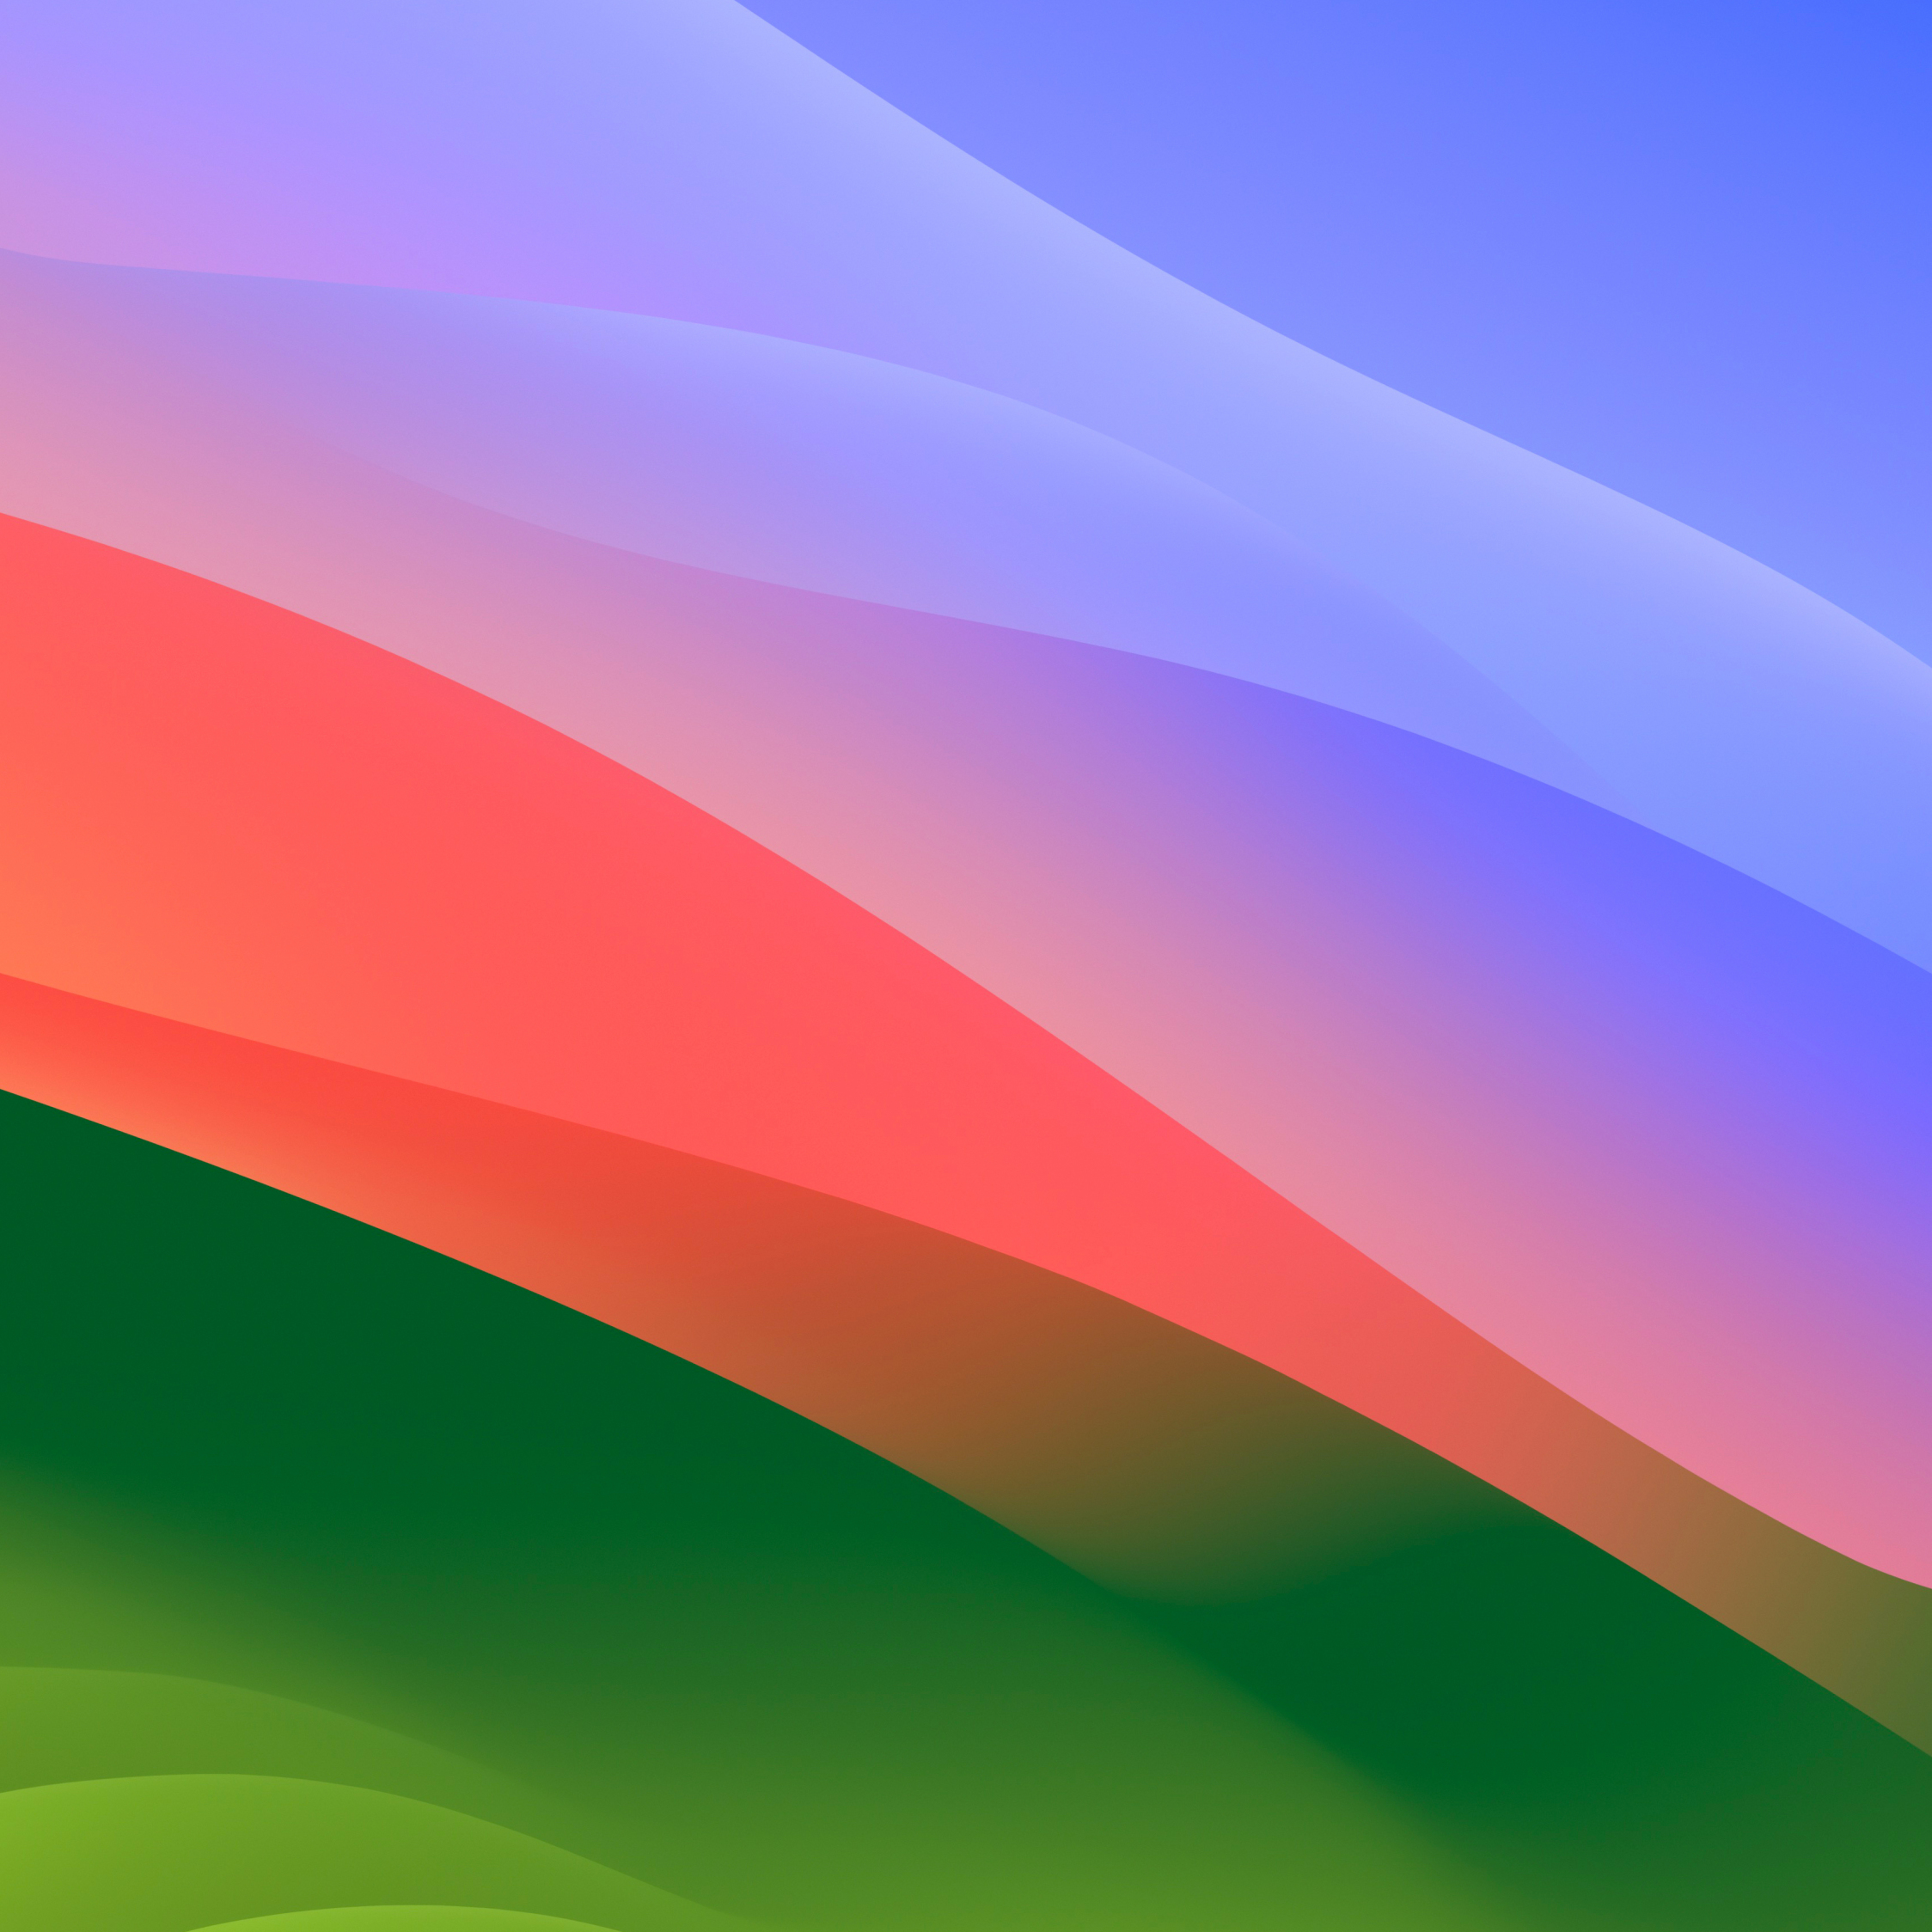 MacOS Sonoma, colorful waves, stock photo, 2248x2248 wallpaper